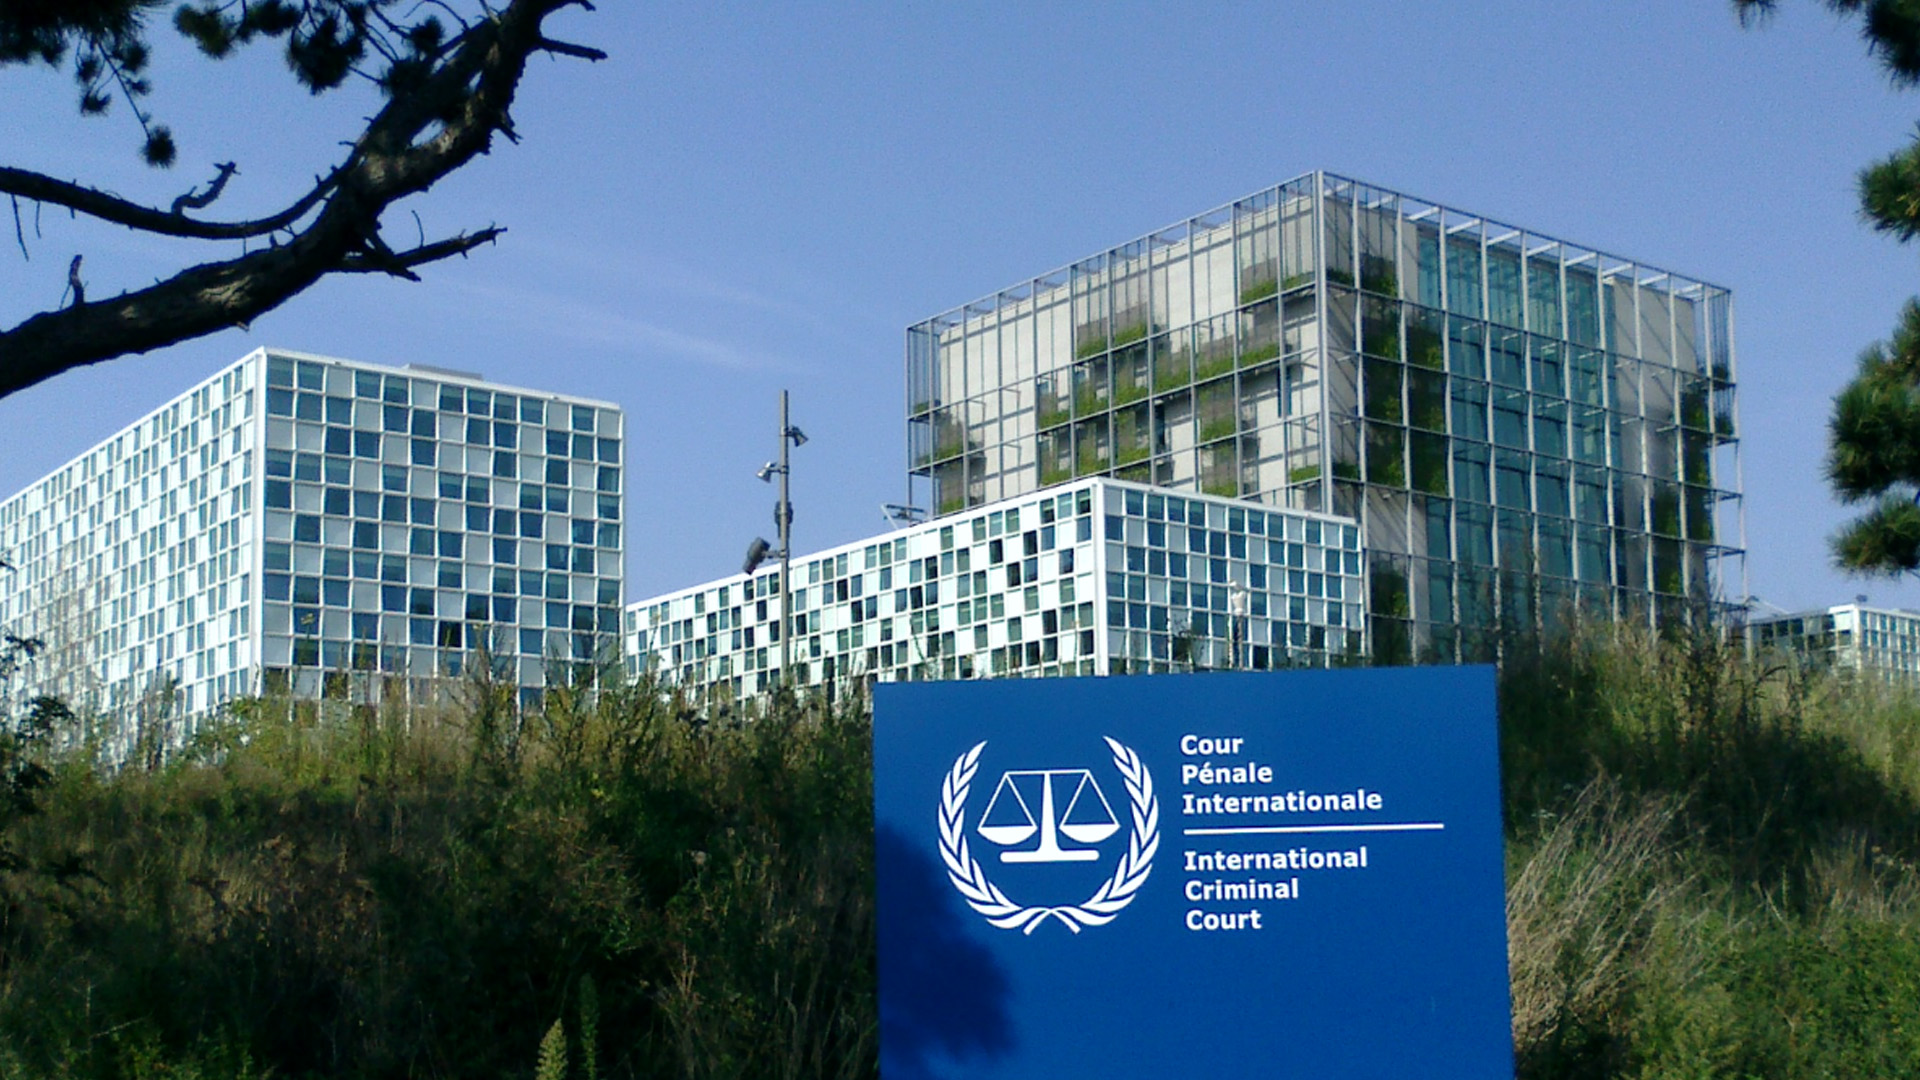 Headquarters of the International Criminal Court in The Hague, Netherlands